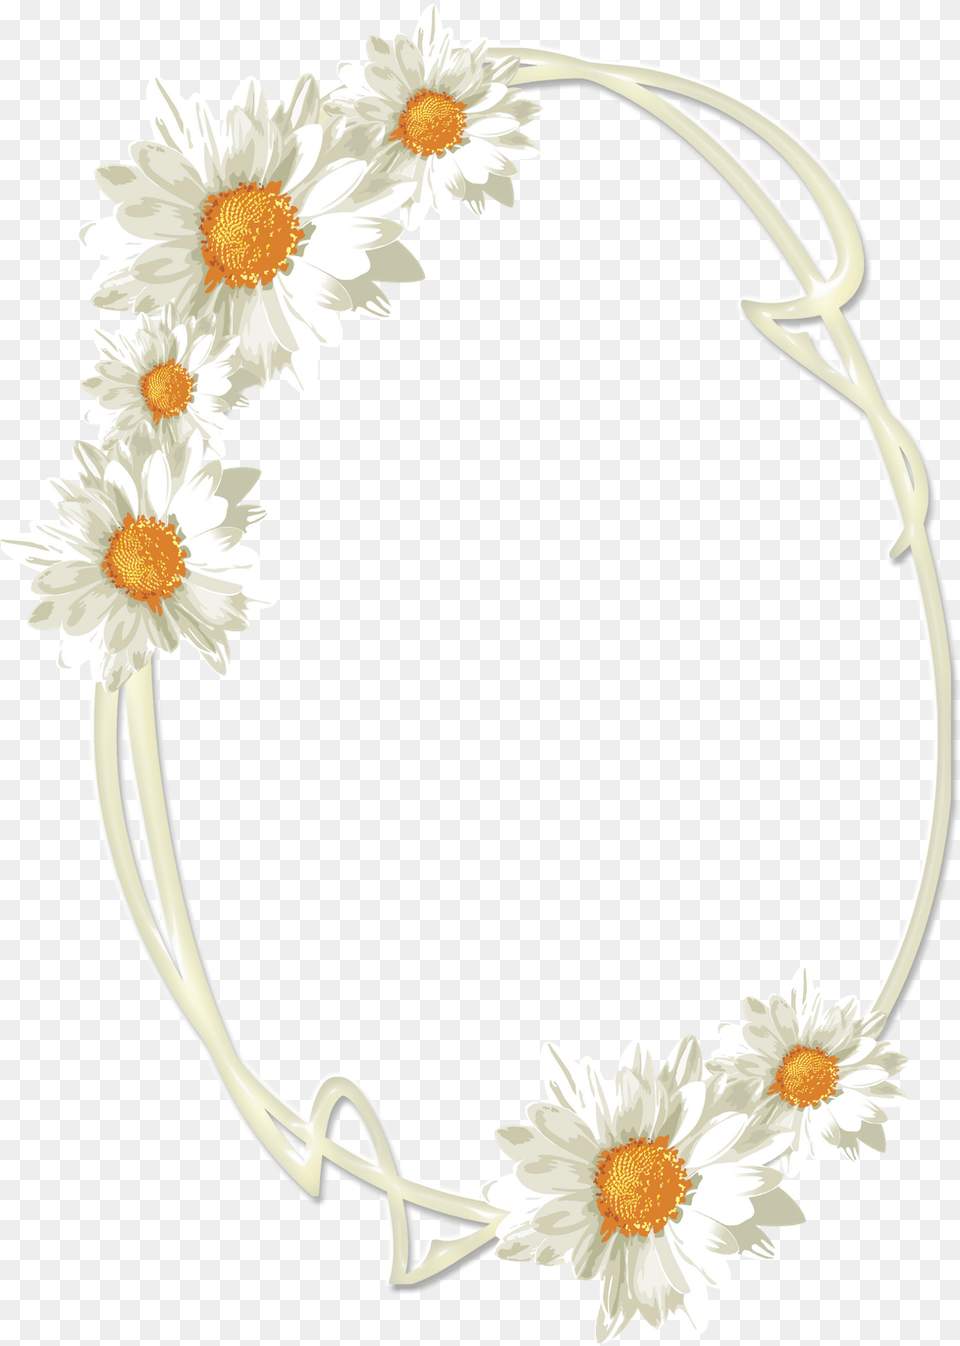 Central Photoshop Frames Oval Com Flores Adobe Photoshop, Accessories, Daisy, Flower, Plant Png